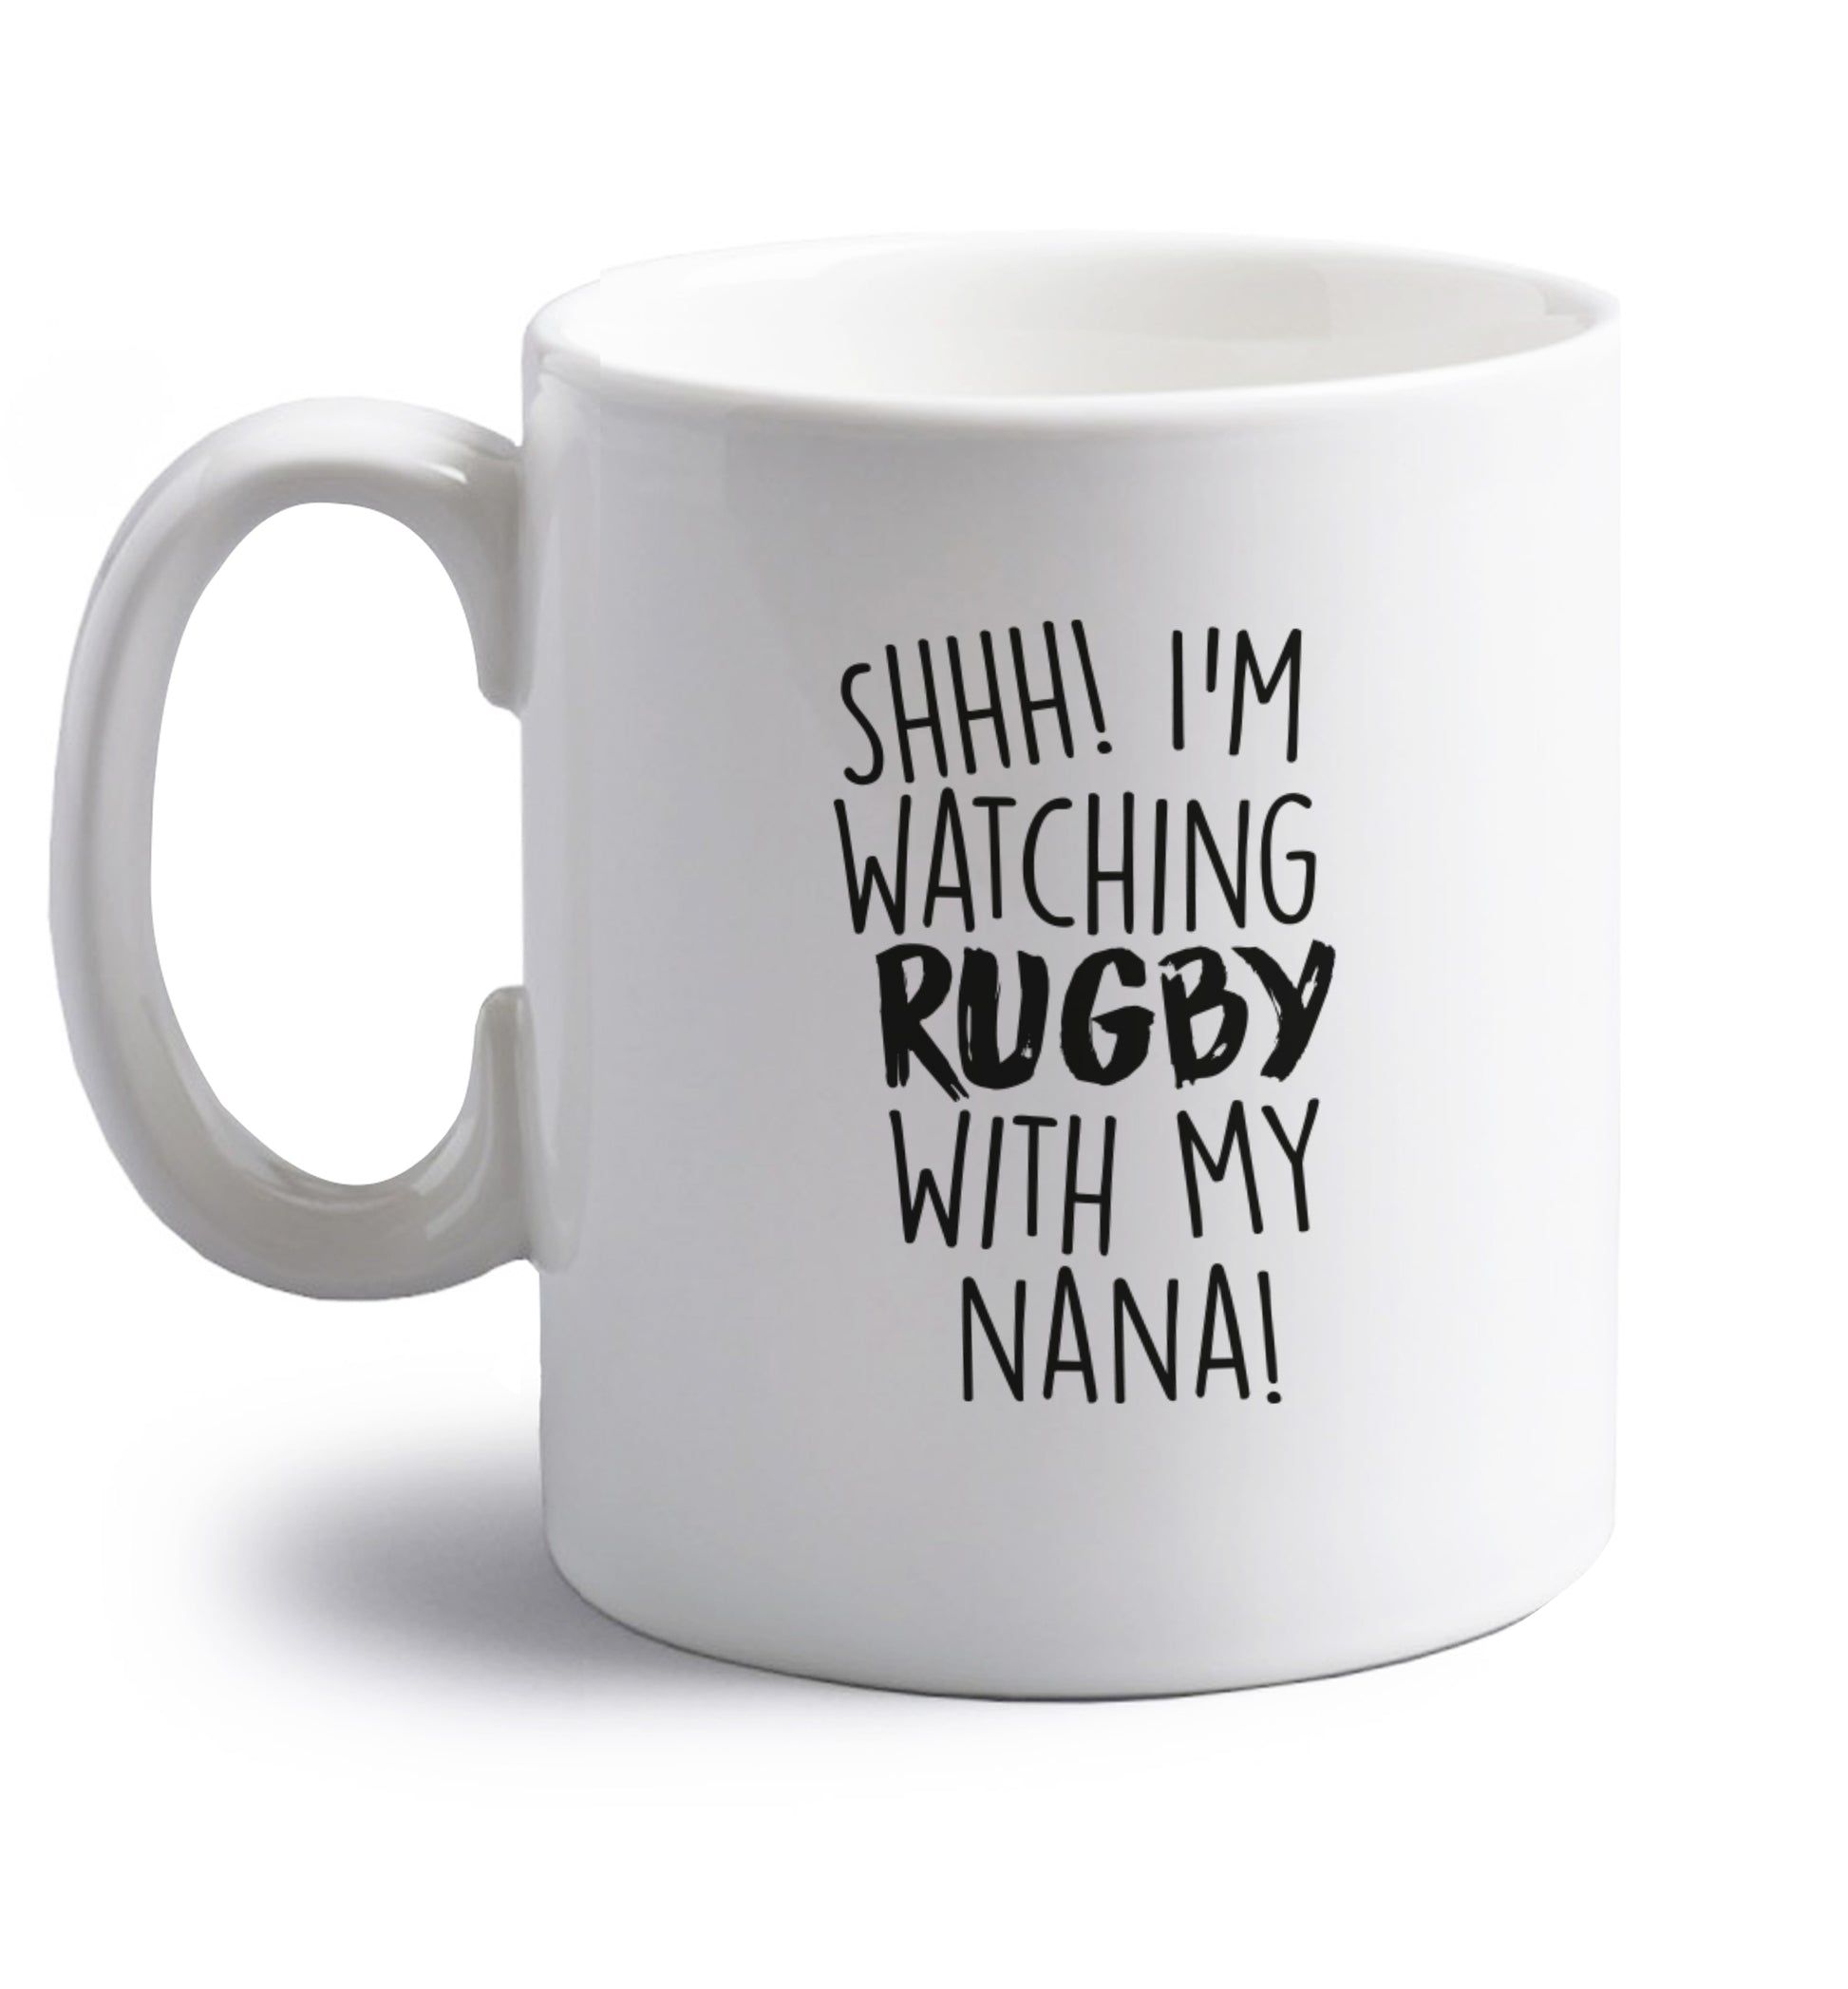 Shh I'm watching rugby with my nana right handed white ceramic mug 